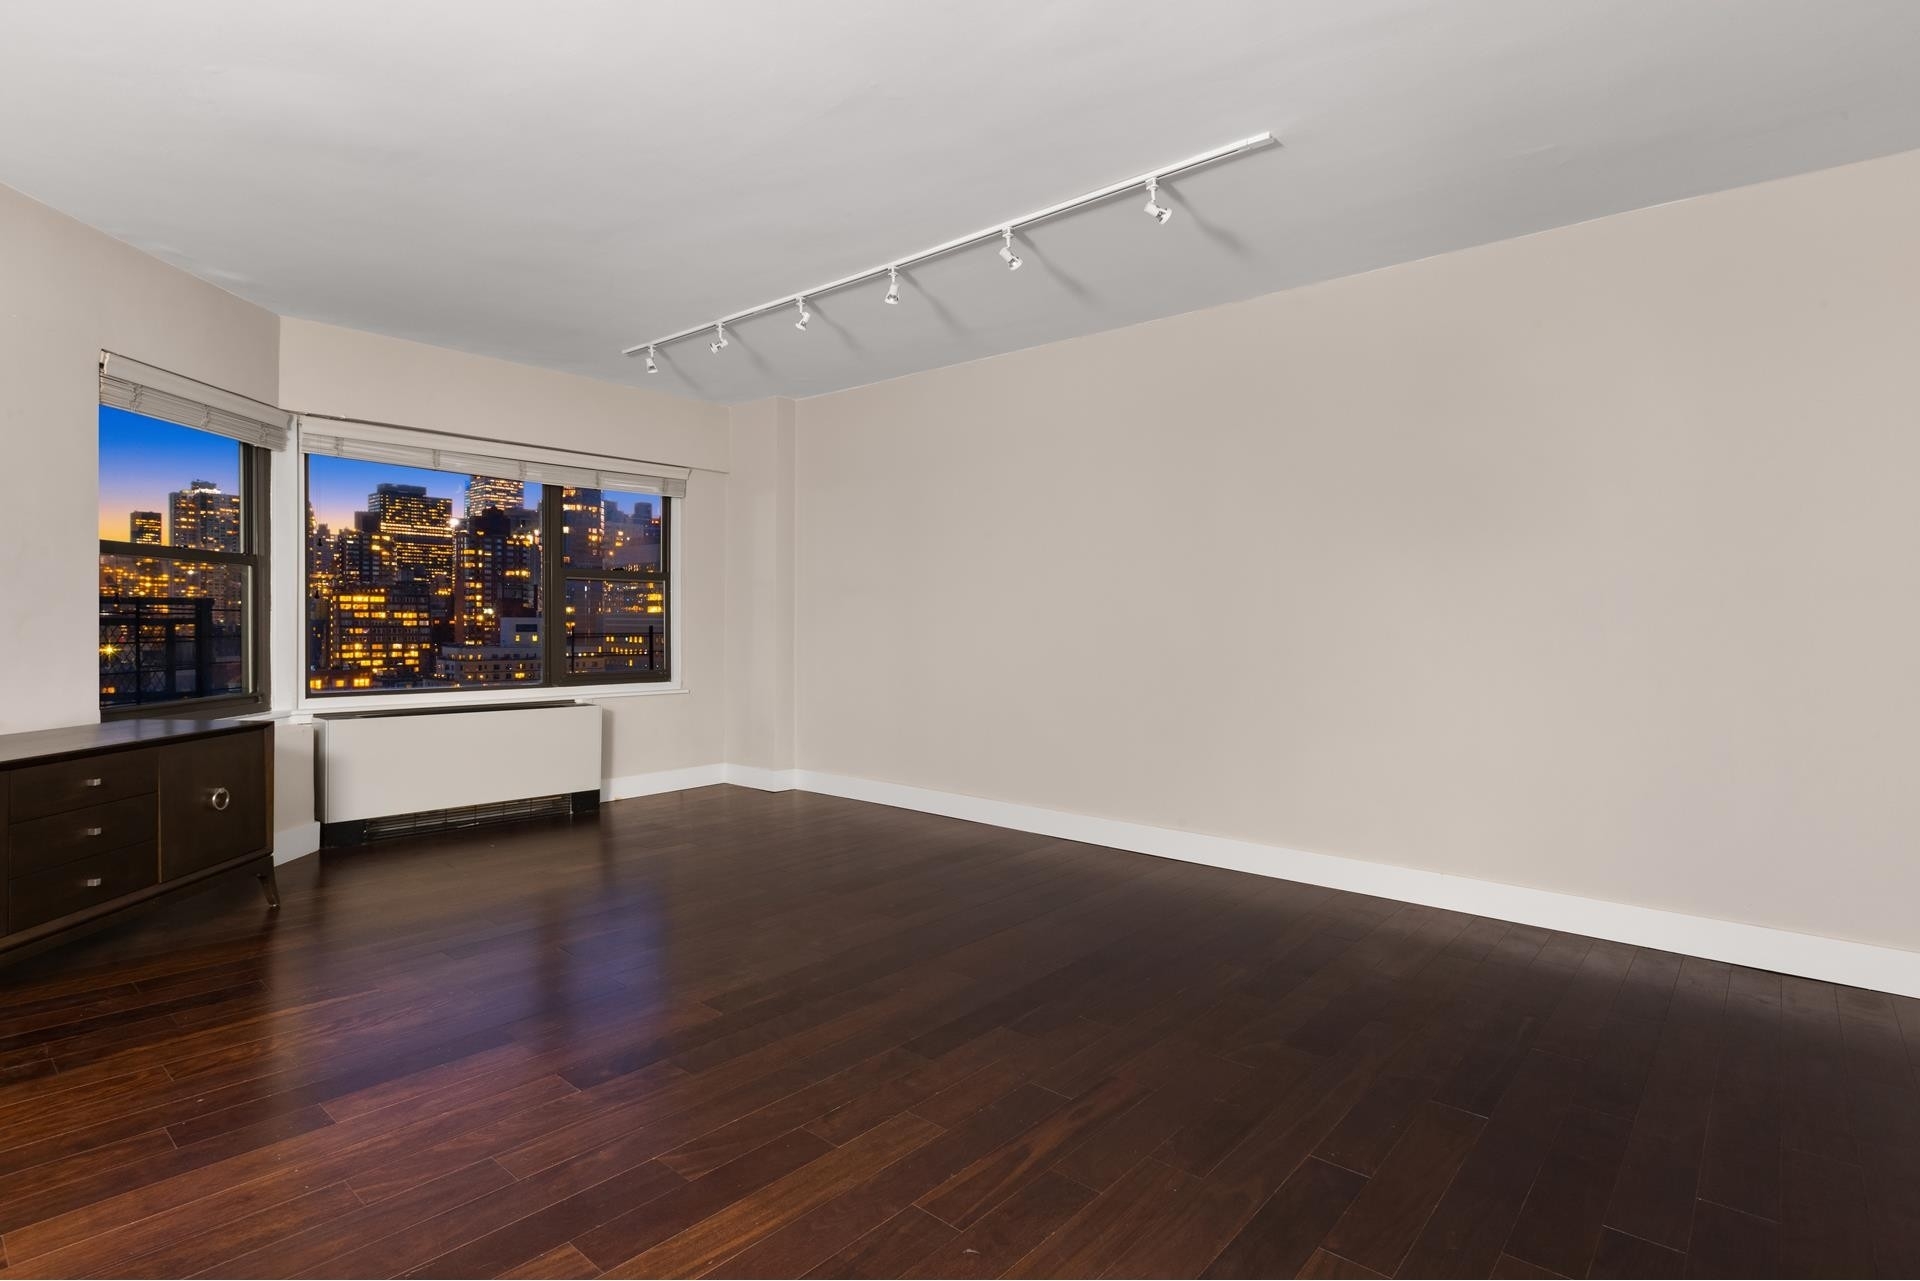 14. Co-op Properties for Sale at 345 E 69TH ST, PHC Lenox Hill, New York, New York 10021